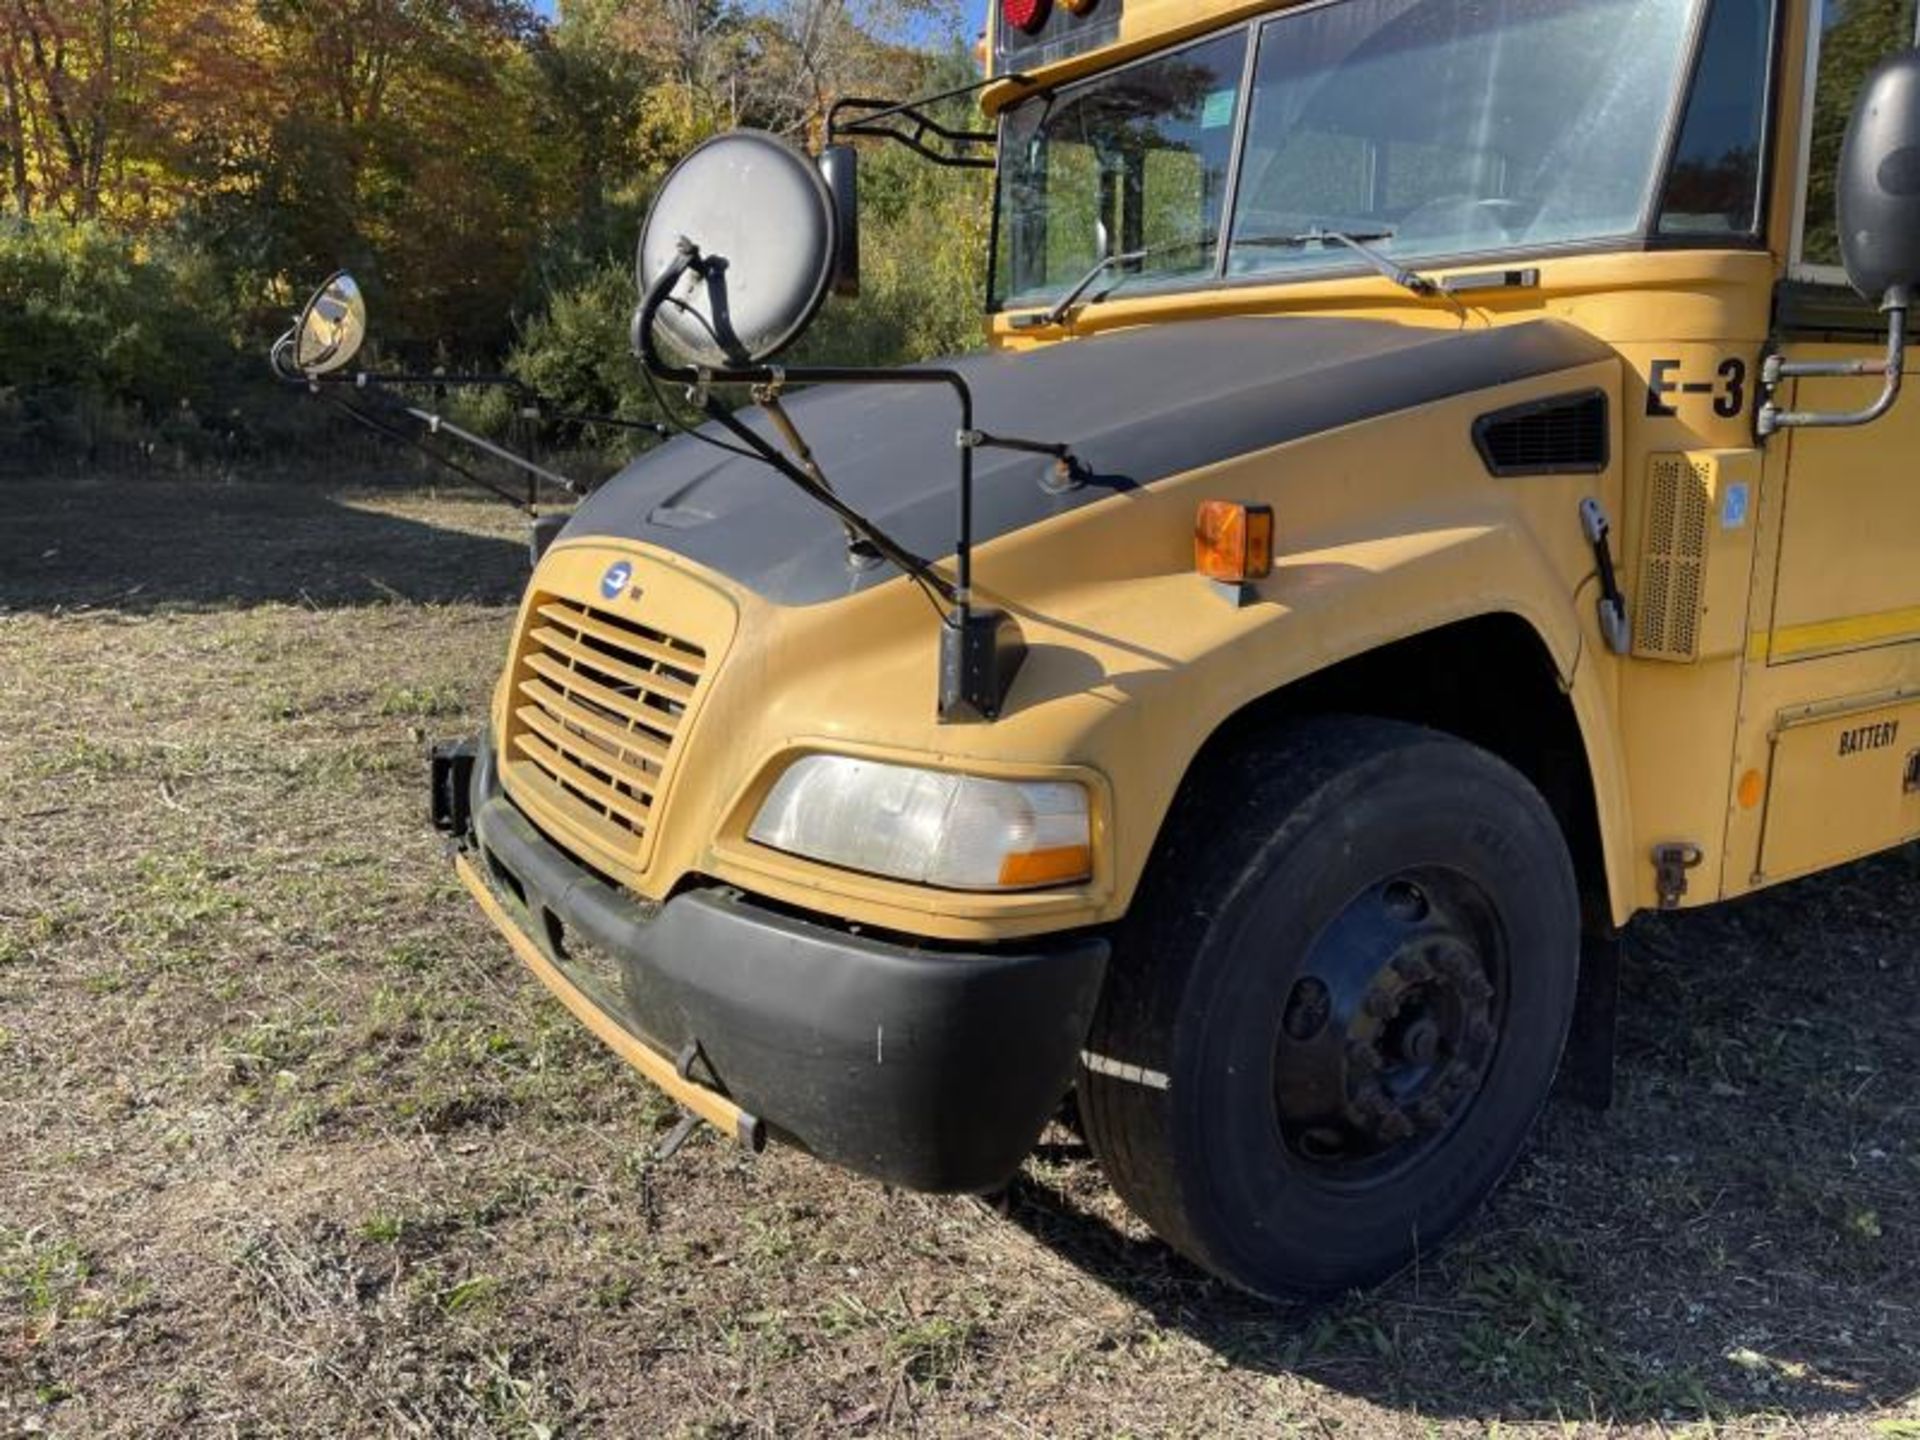 2011 Blue Bird Bus, Odometer Reads 193,151, Engine Starts, New Batteries, VIN: 1BAKGCPA9BF278622 - Image 4 of 40